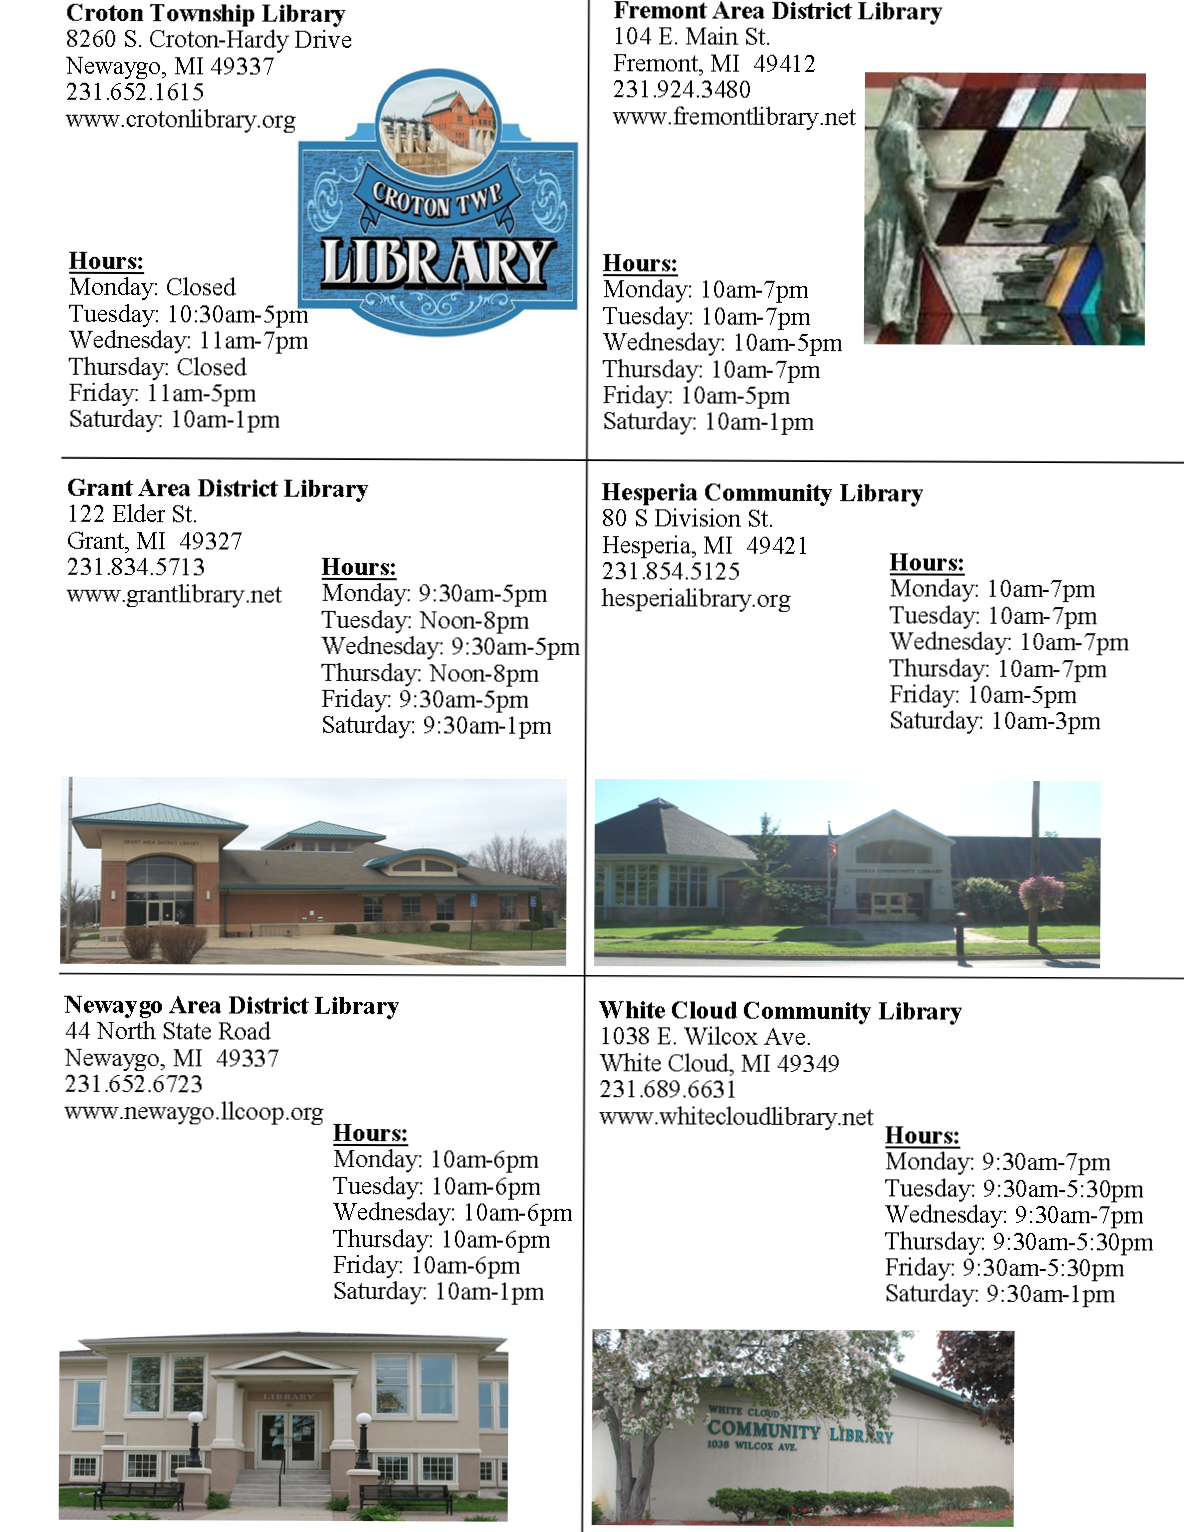 newaygo_county_libraries (3).png